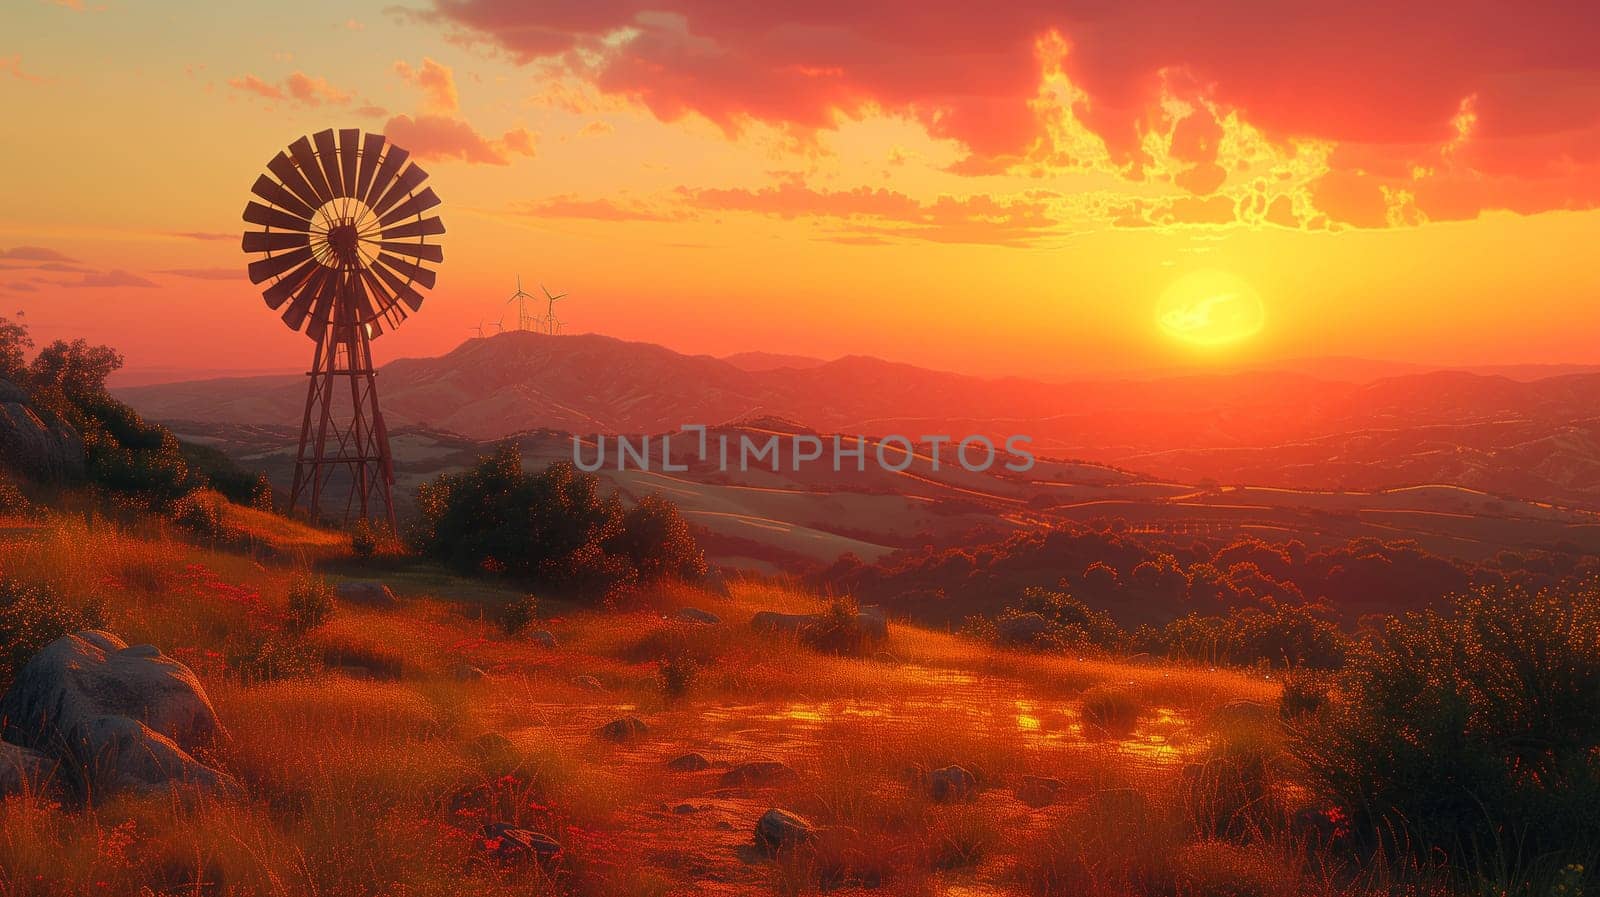 A windmill stands on a hill during sunset, surrounded by a colorful sky filled with clouds and the afterglow of the day. The atmosphere is serene as dusk settles in